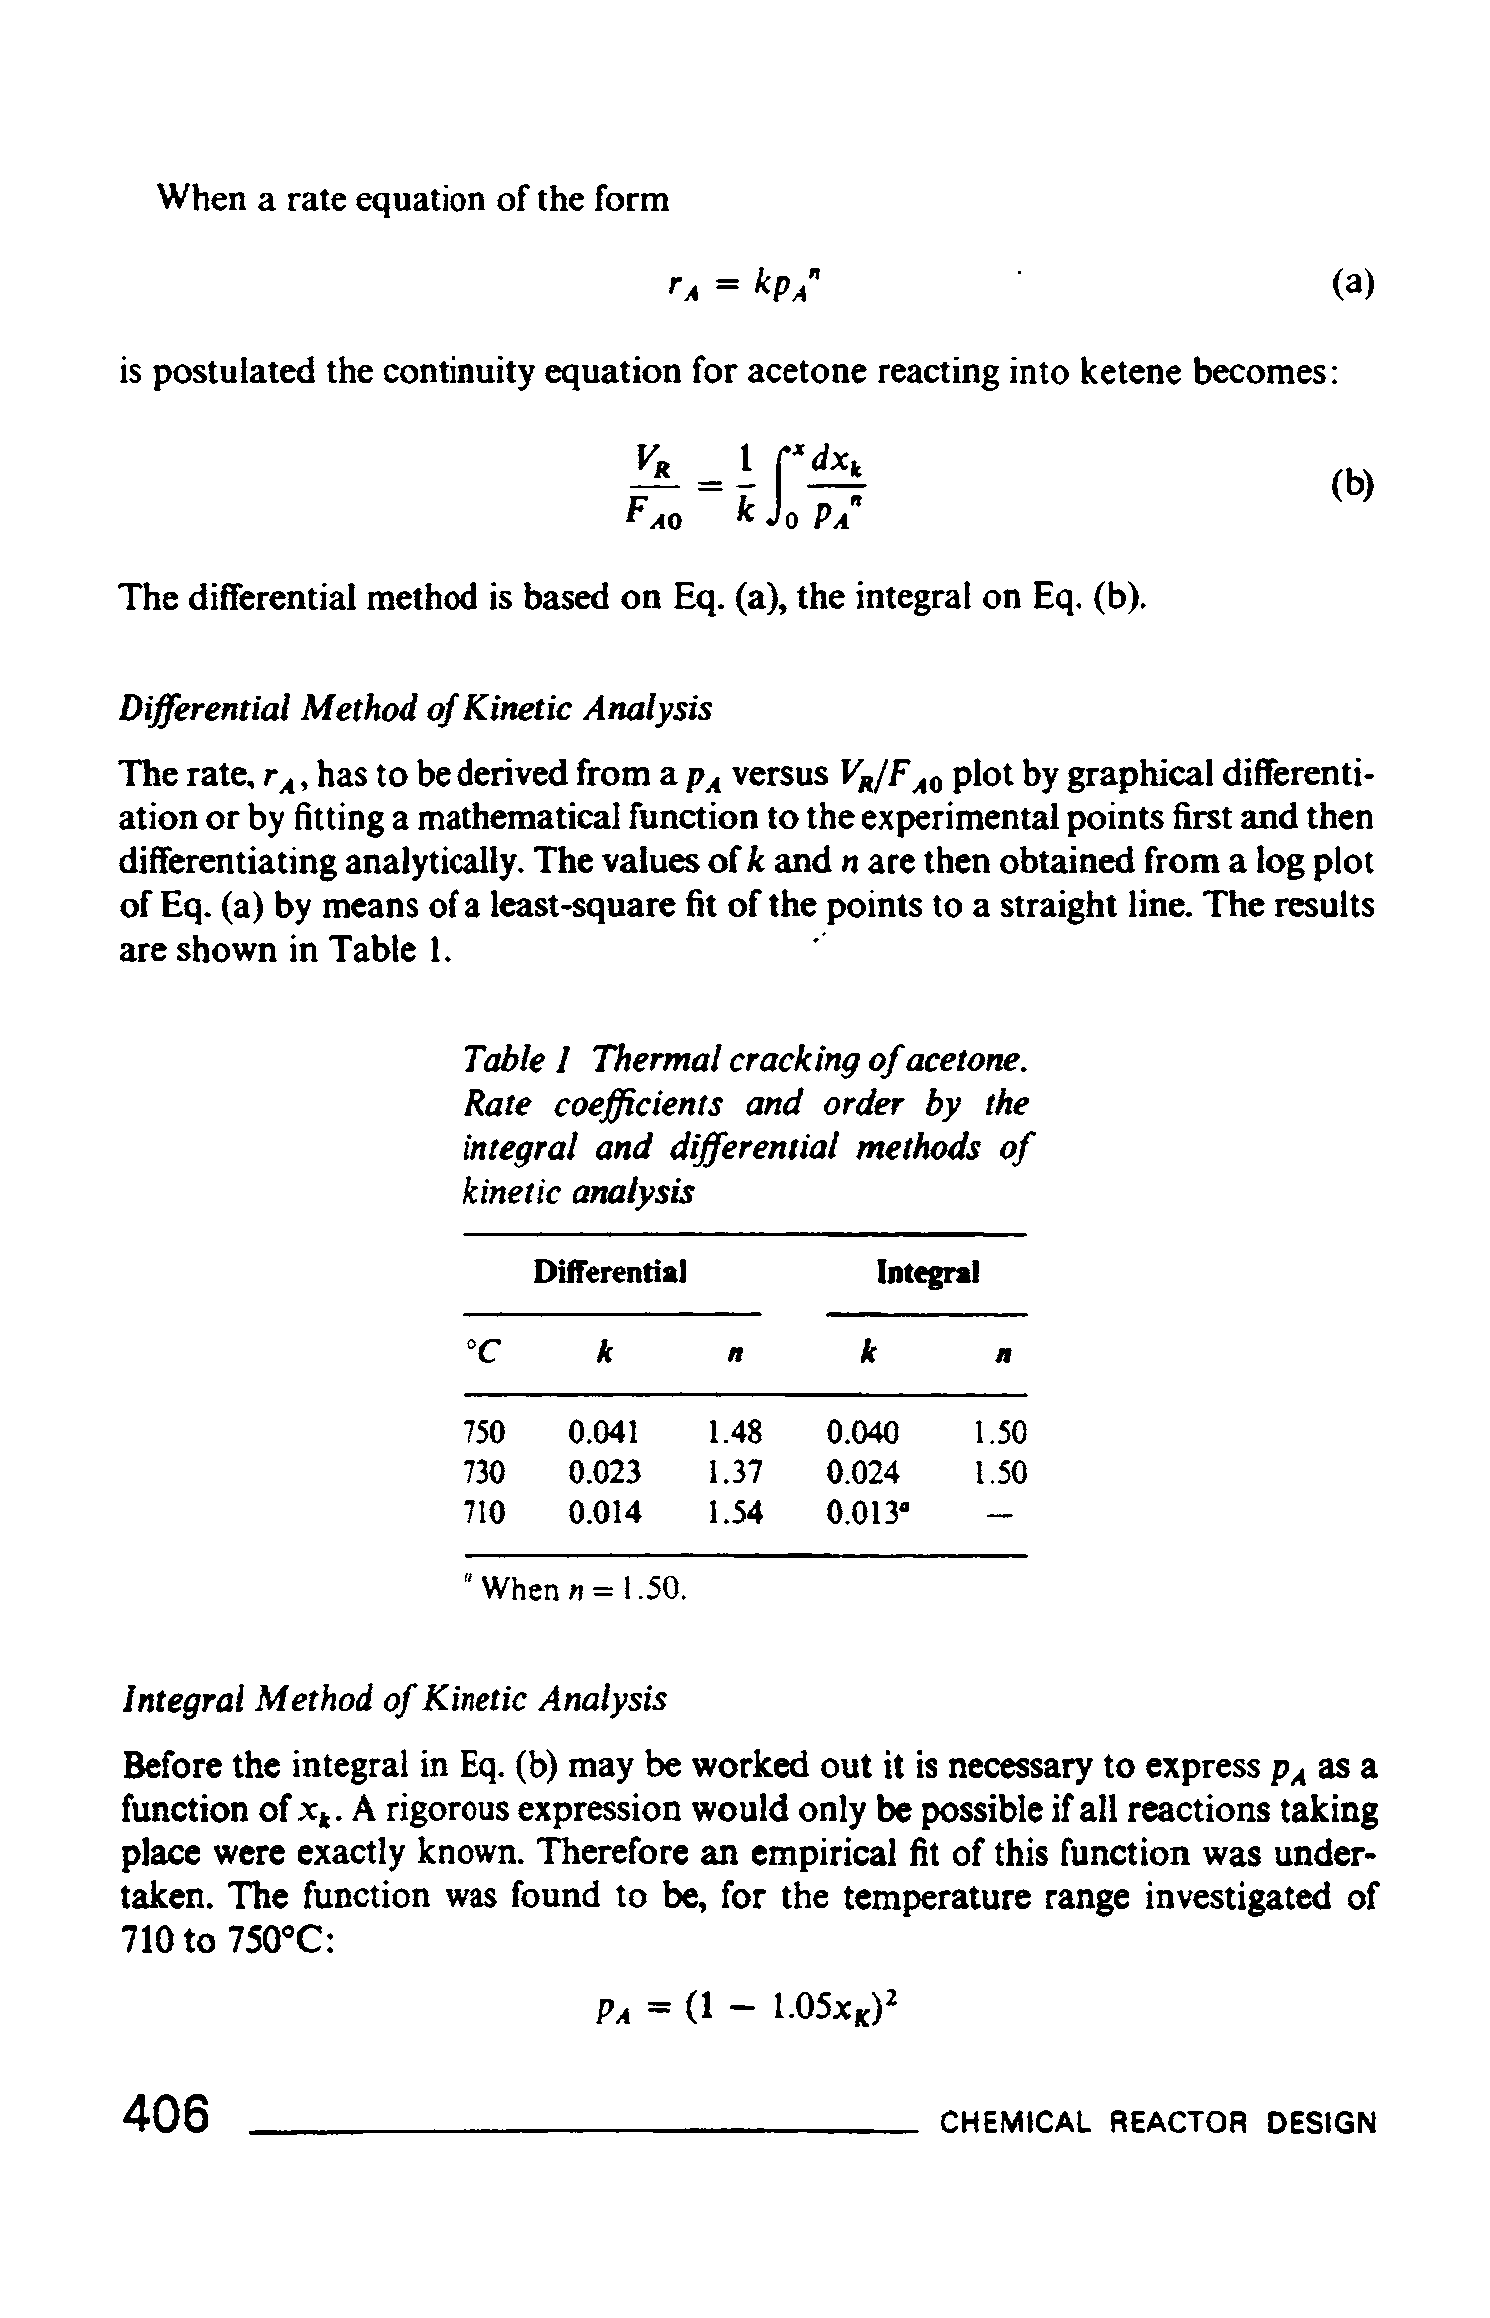 Table I Thermal cracking of acetone. Rate coefficients and order by the integral and differential methods of kinetic analysis...